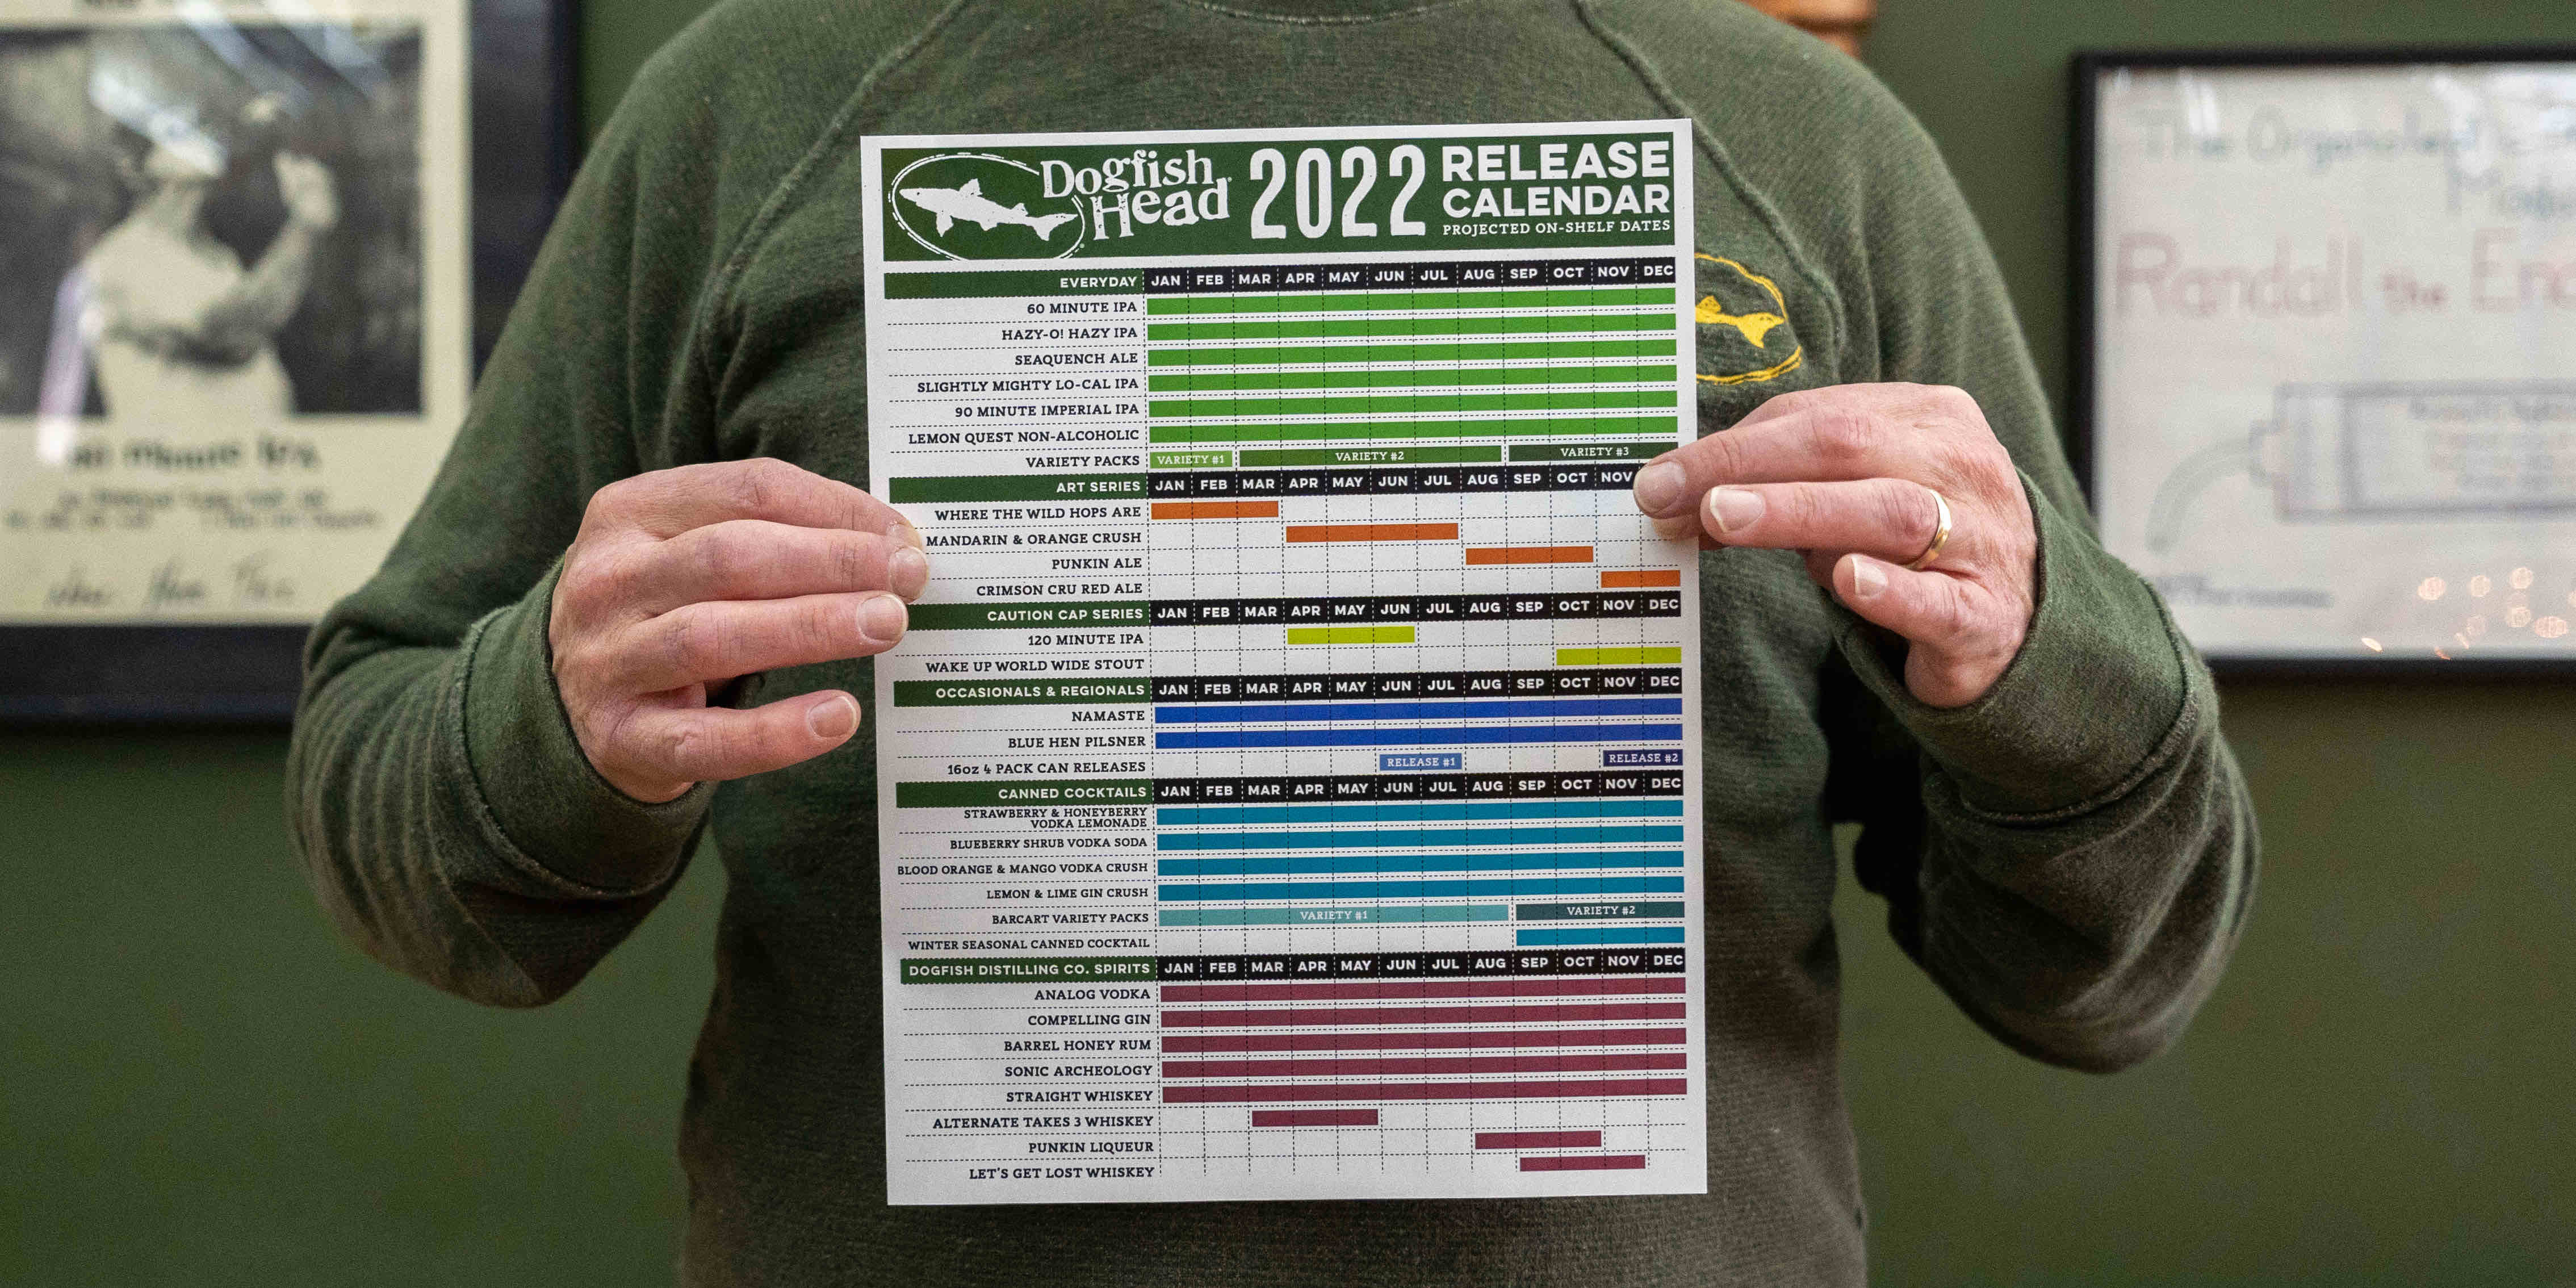 image of 2022 Beverage Calendar courtesy of Dogfish Head Craft Brewery